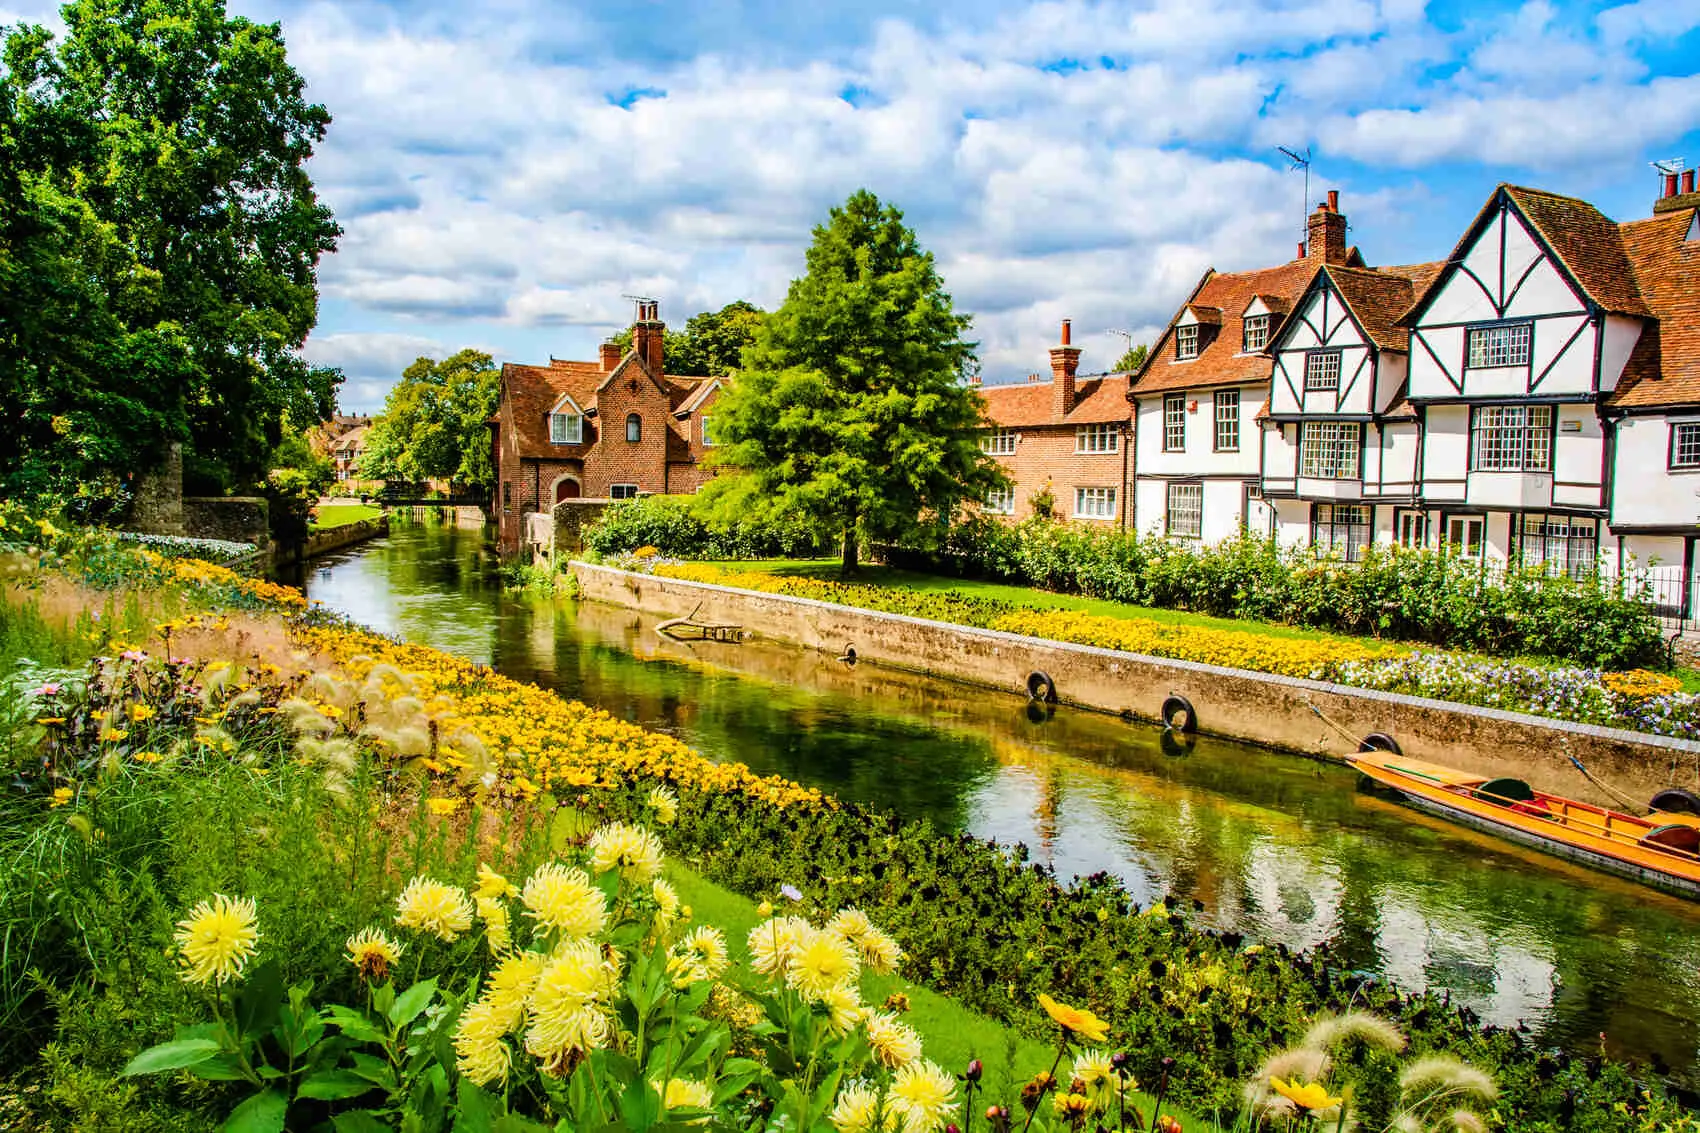 Landscape-of-the-Great-Stour-river-near-Westgate-Gardens-Canterbury-Kent-UK